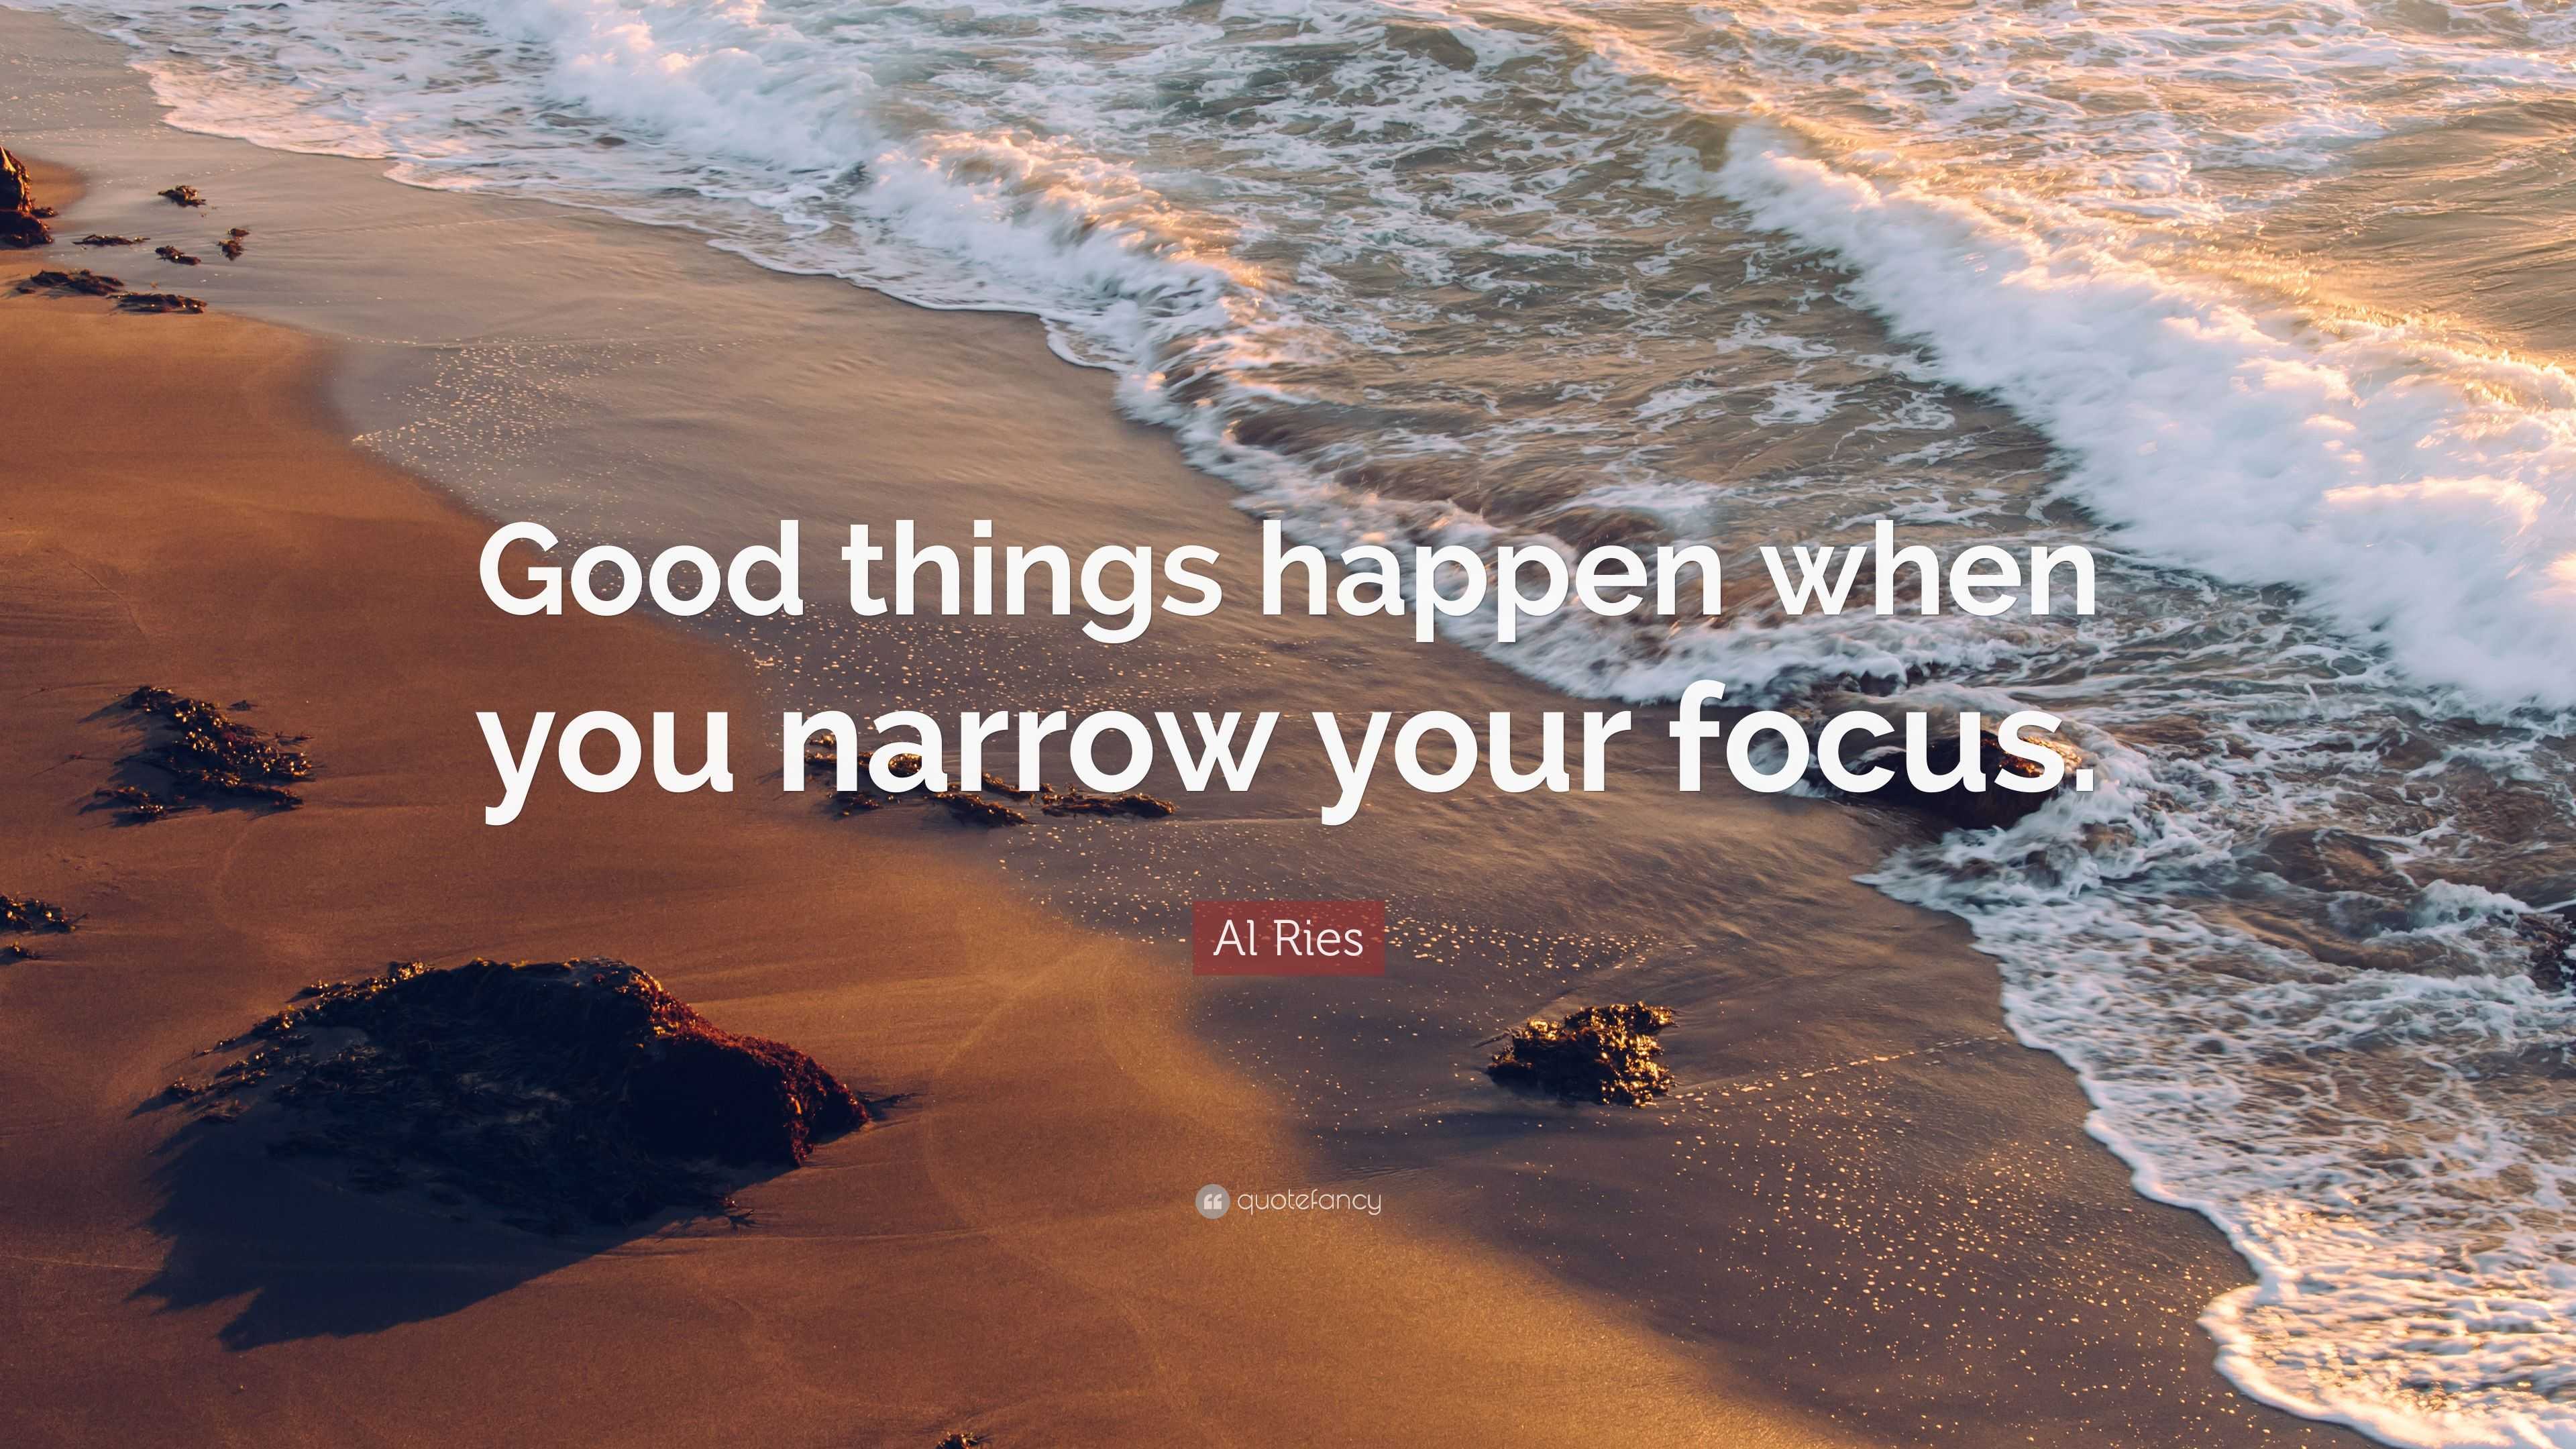 Al Ries Quote: “Good things happen when you narrow your focus.”